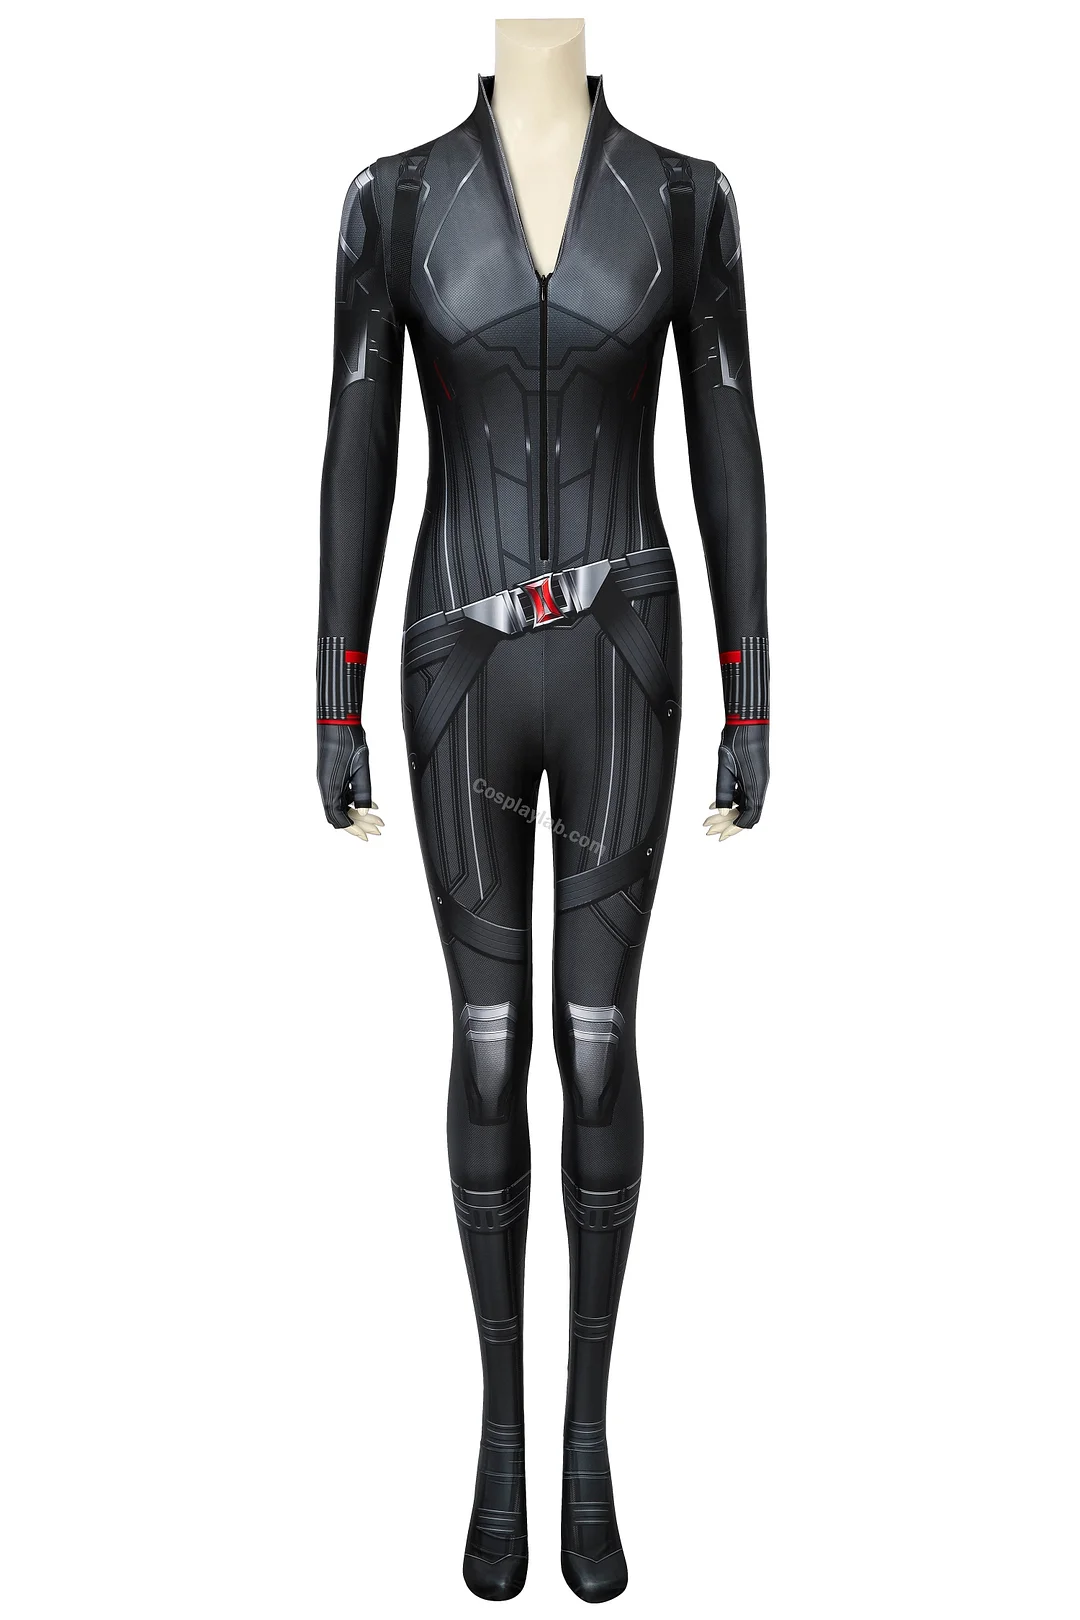 Black Widow Cosplay Costumes 3D Printed Creative Spandex Suit Jumpsuits By CosplayLab